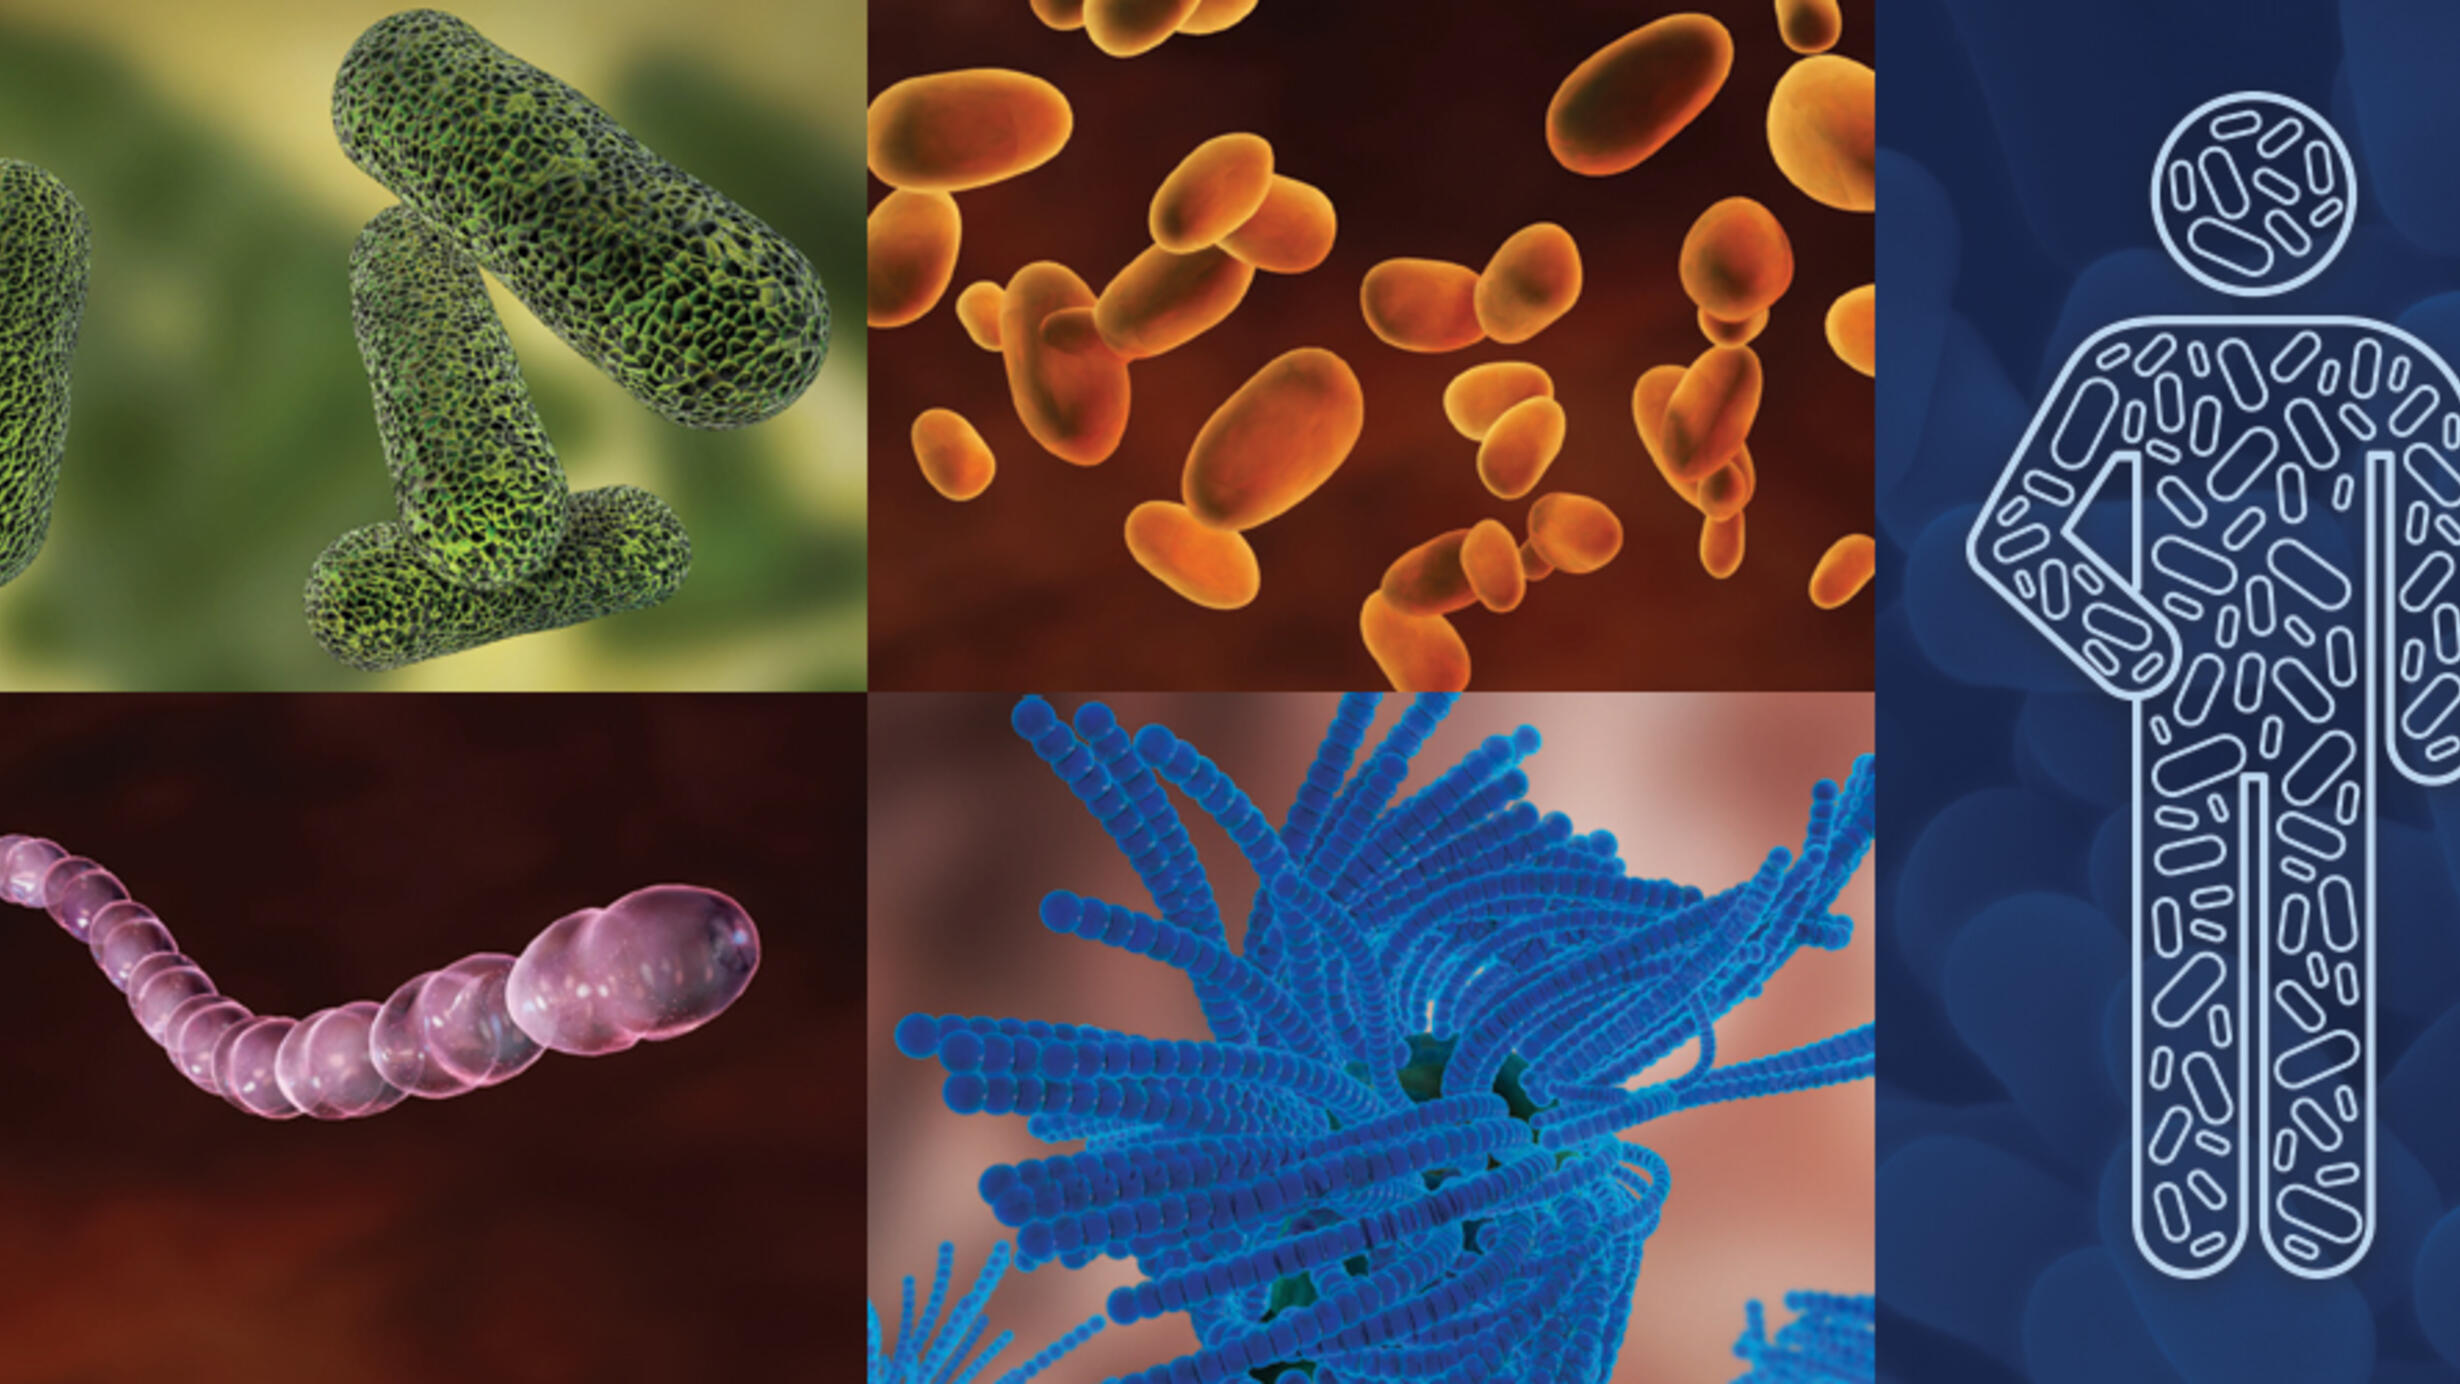 Collage with four colorful renderings of different types of bacteria of varying shapes beside a human figure icon filled with capsule shapes.